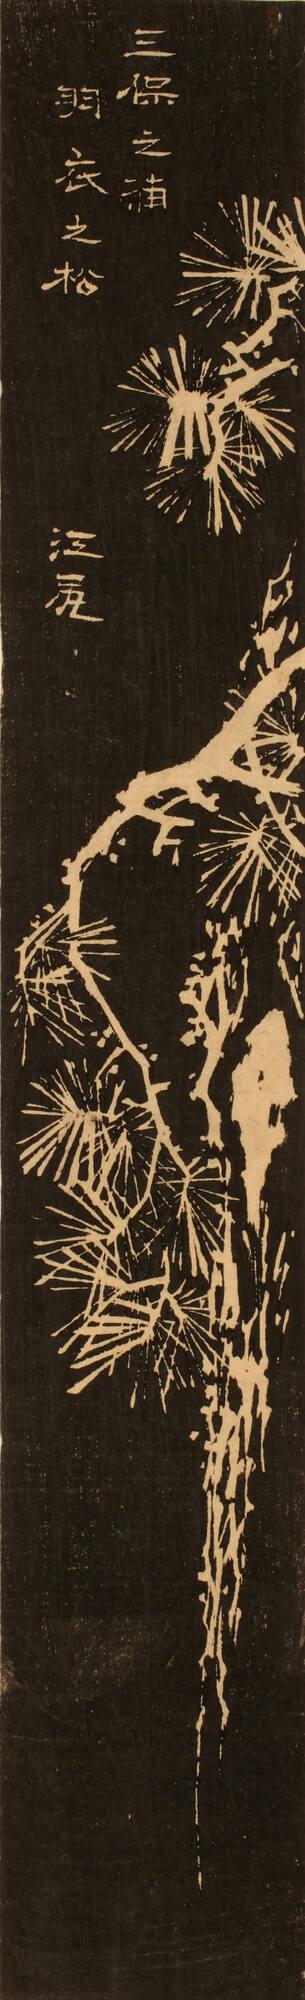 The Pine Tree of the Feathered Robe at Miho Bay near Ejiri, cut from sheet 6 of the harimaze series Pictures of the Fifty-three Stations of the Tōkaidō